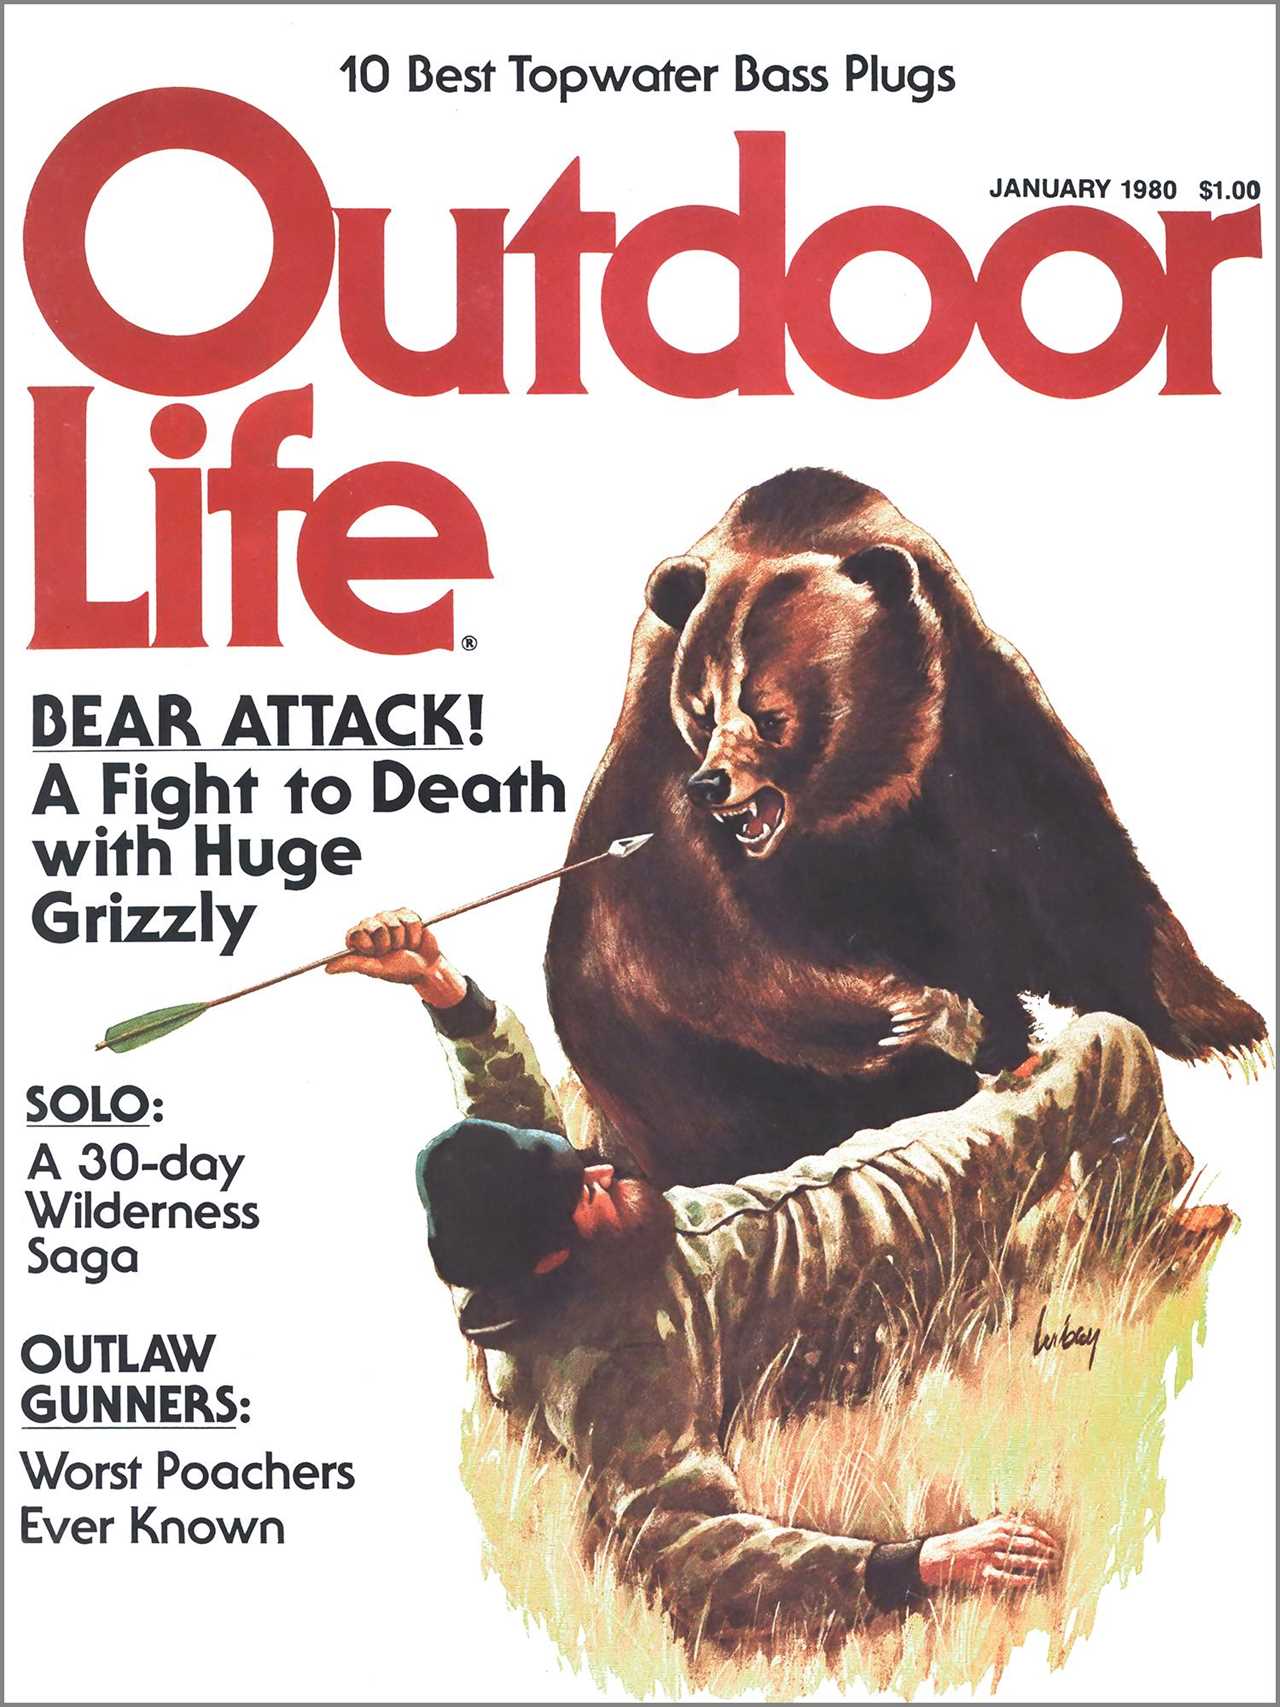 January 1989 cover of Outdoor Life shows bear attack.